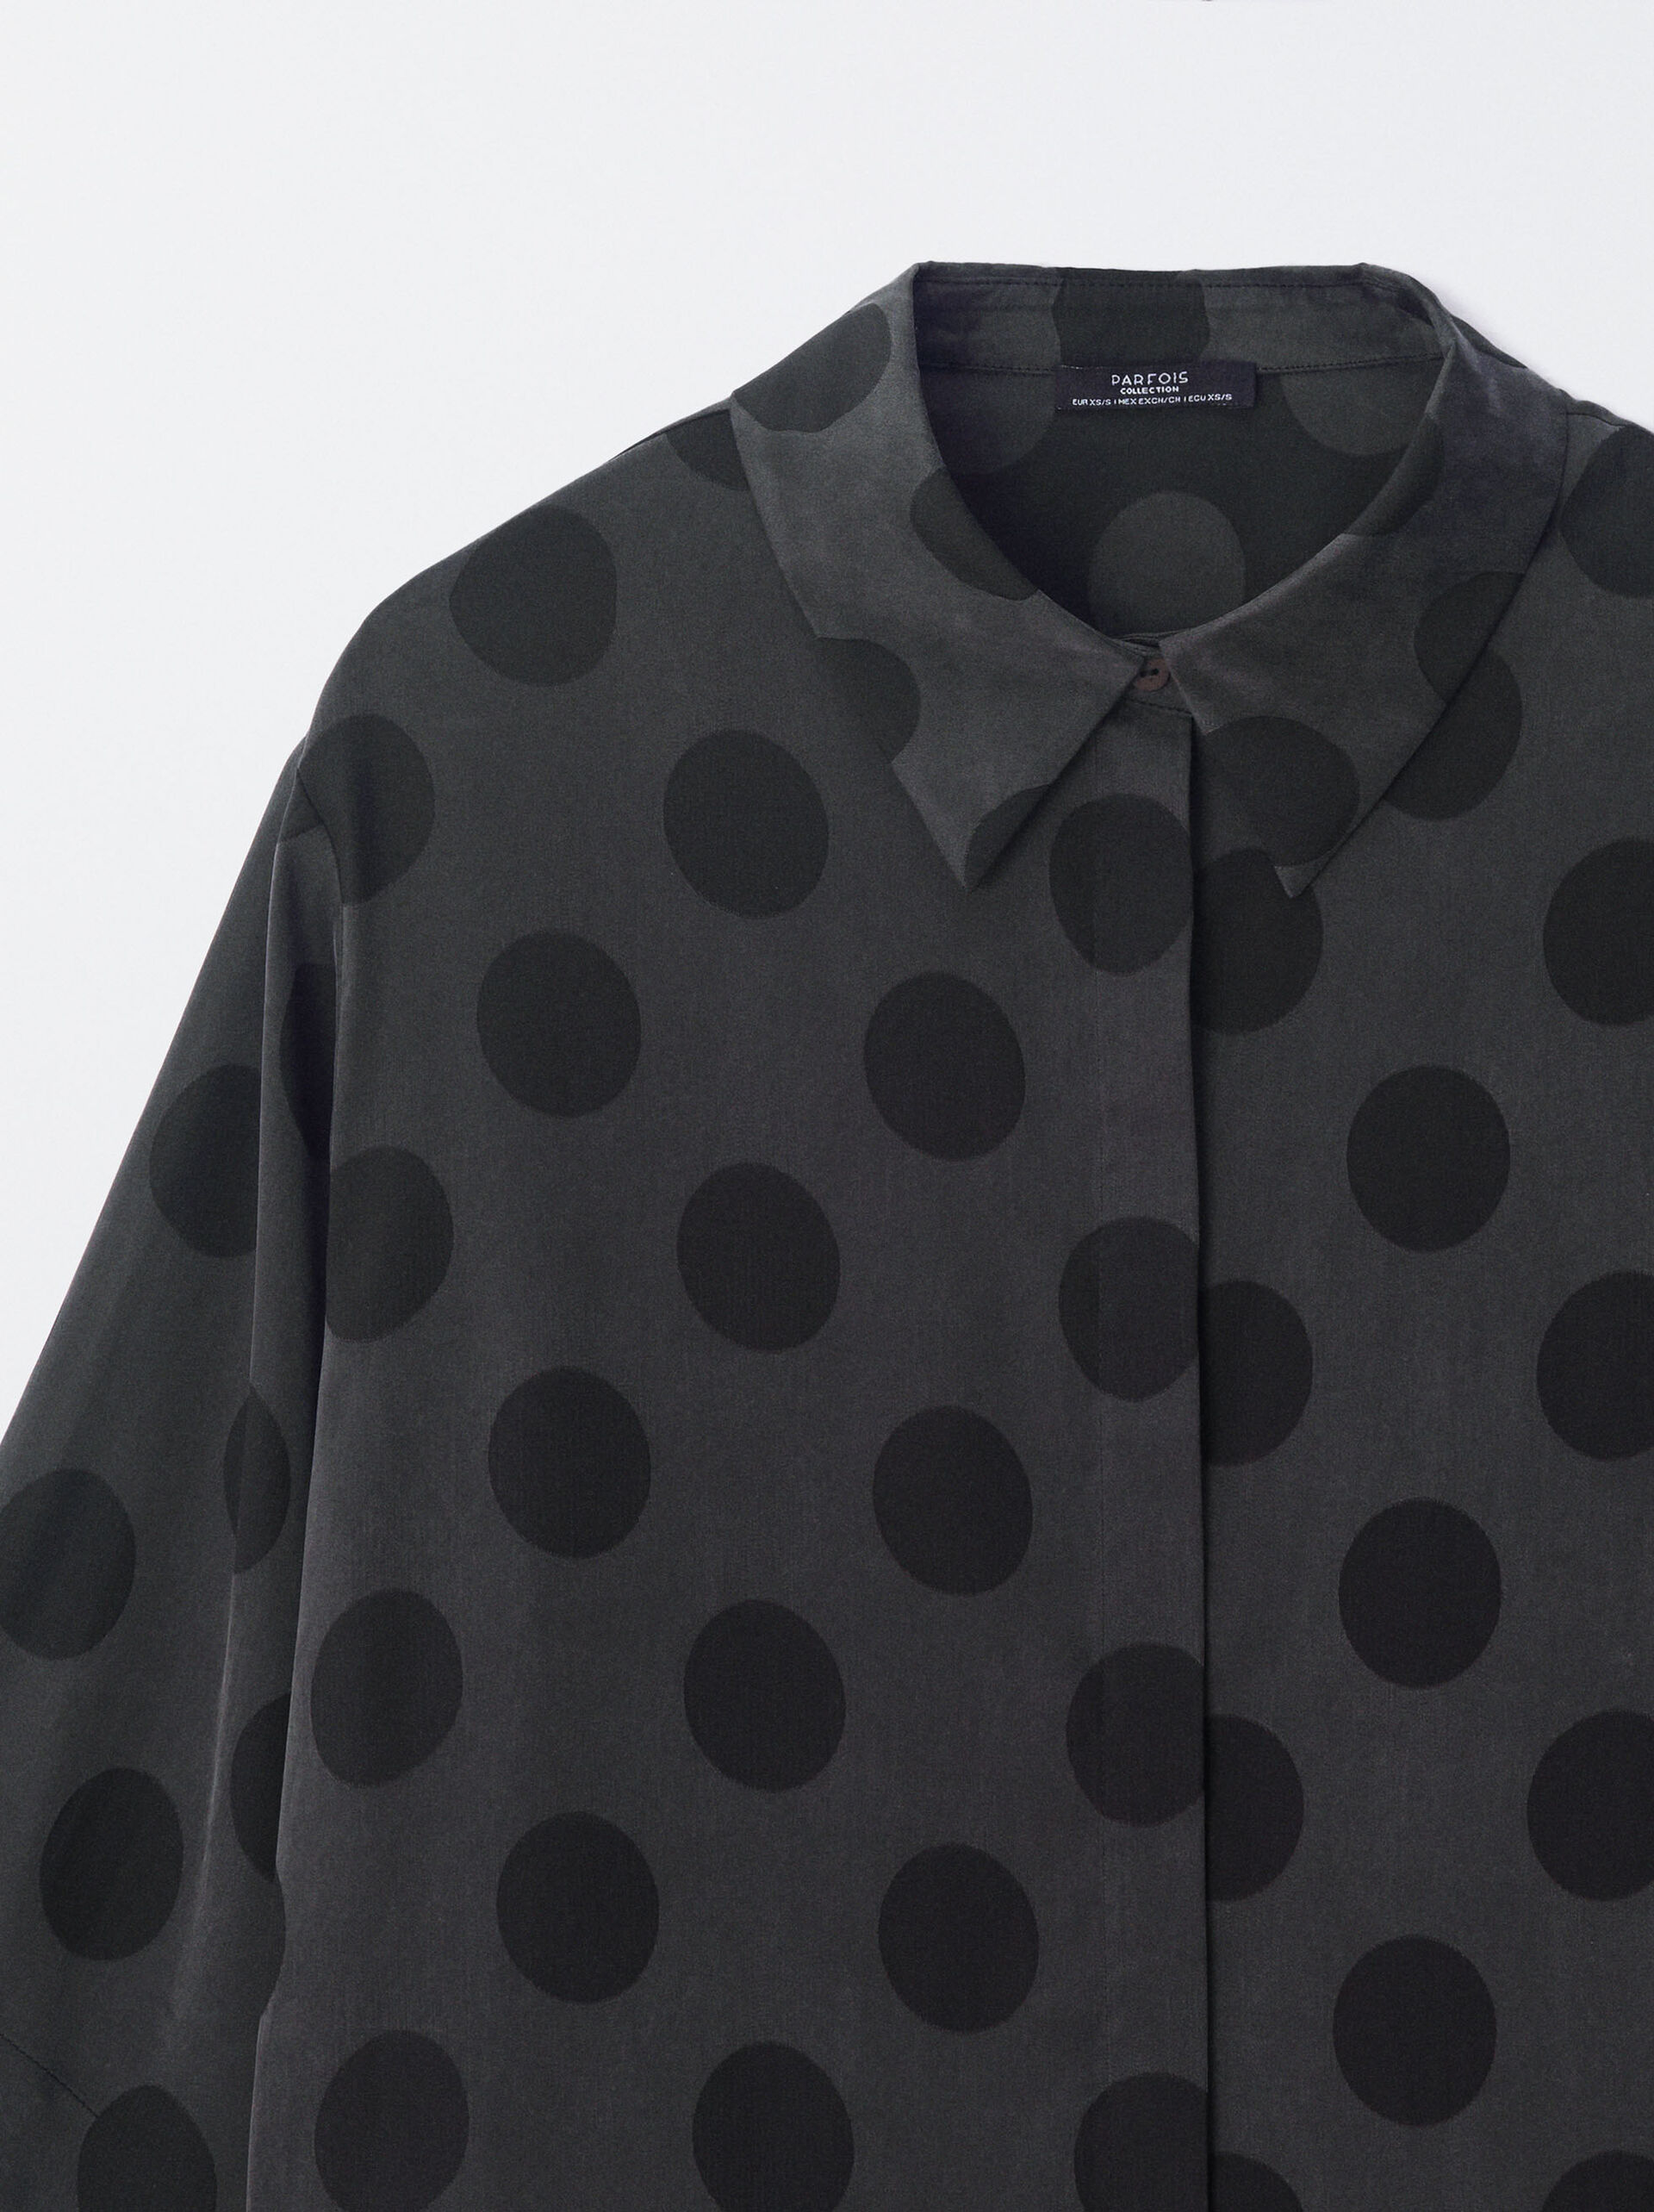 Online Exclusive - Polka Dot Lyocell Shirt image number 6.0